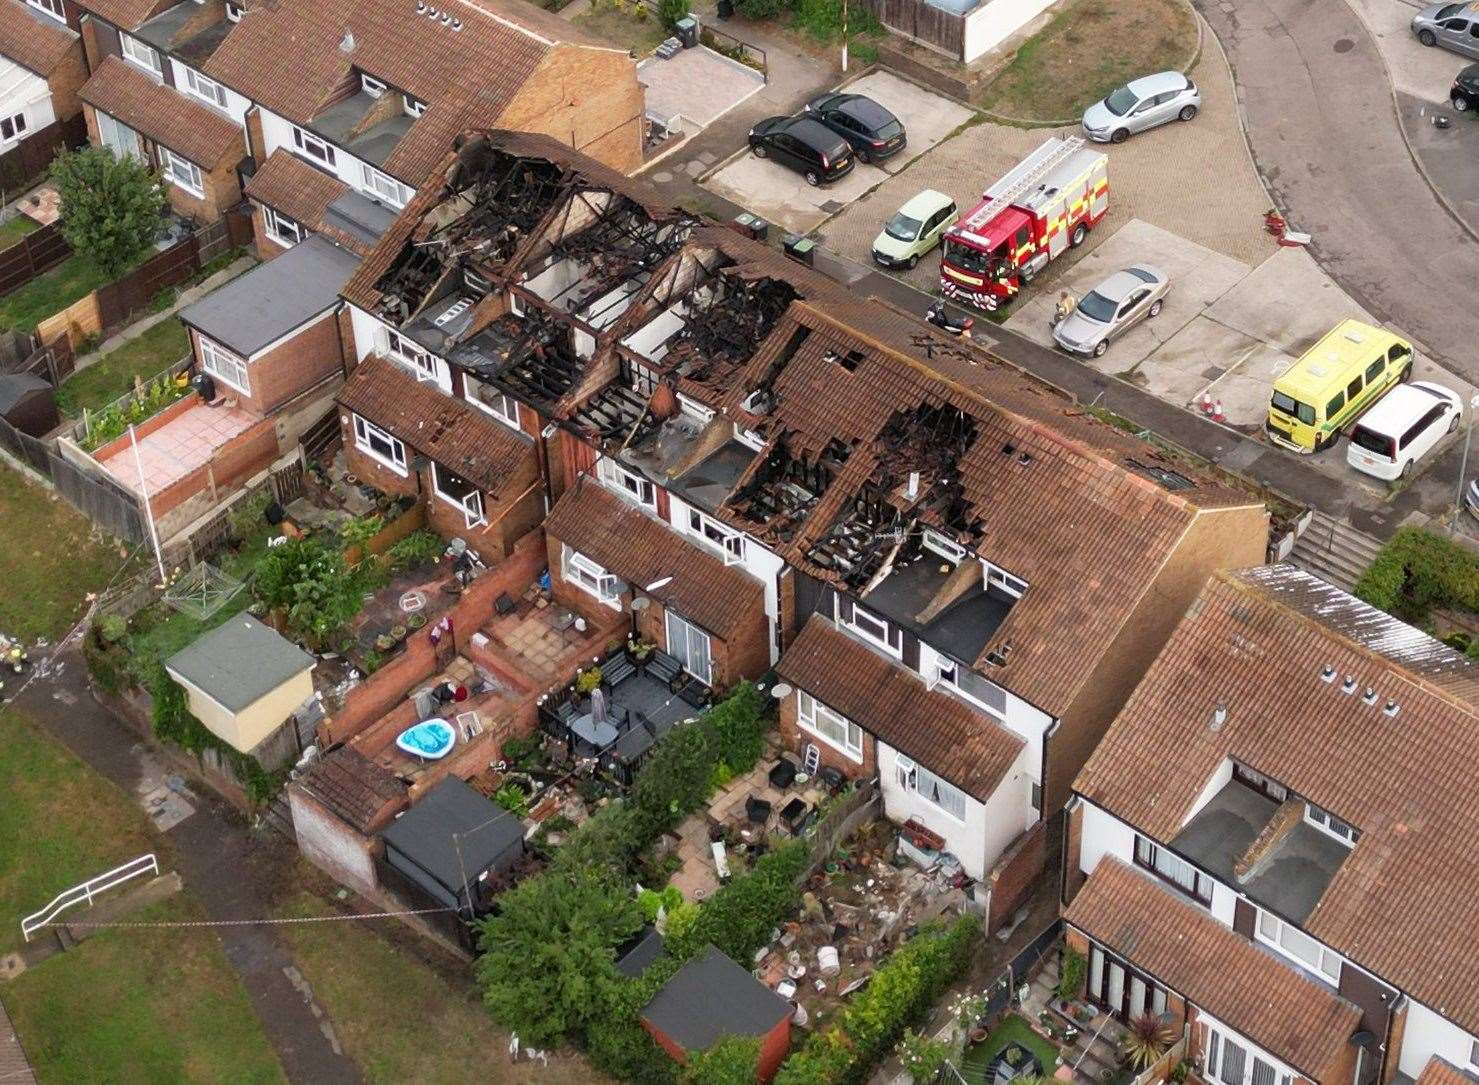 Drone footage shows the devastation left behind by the fire in Rose Street, Northfleet. Picture: SkyShark Media Aerial Imagery